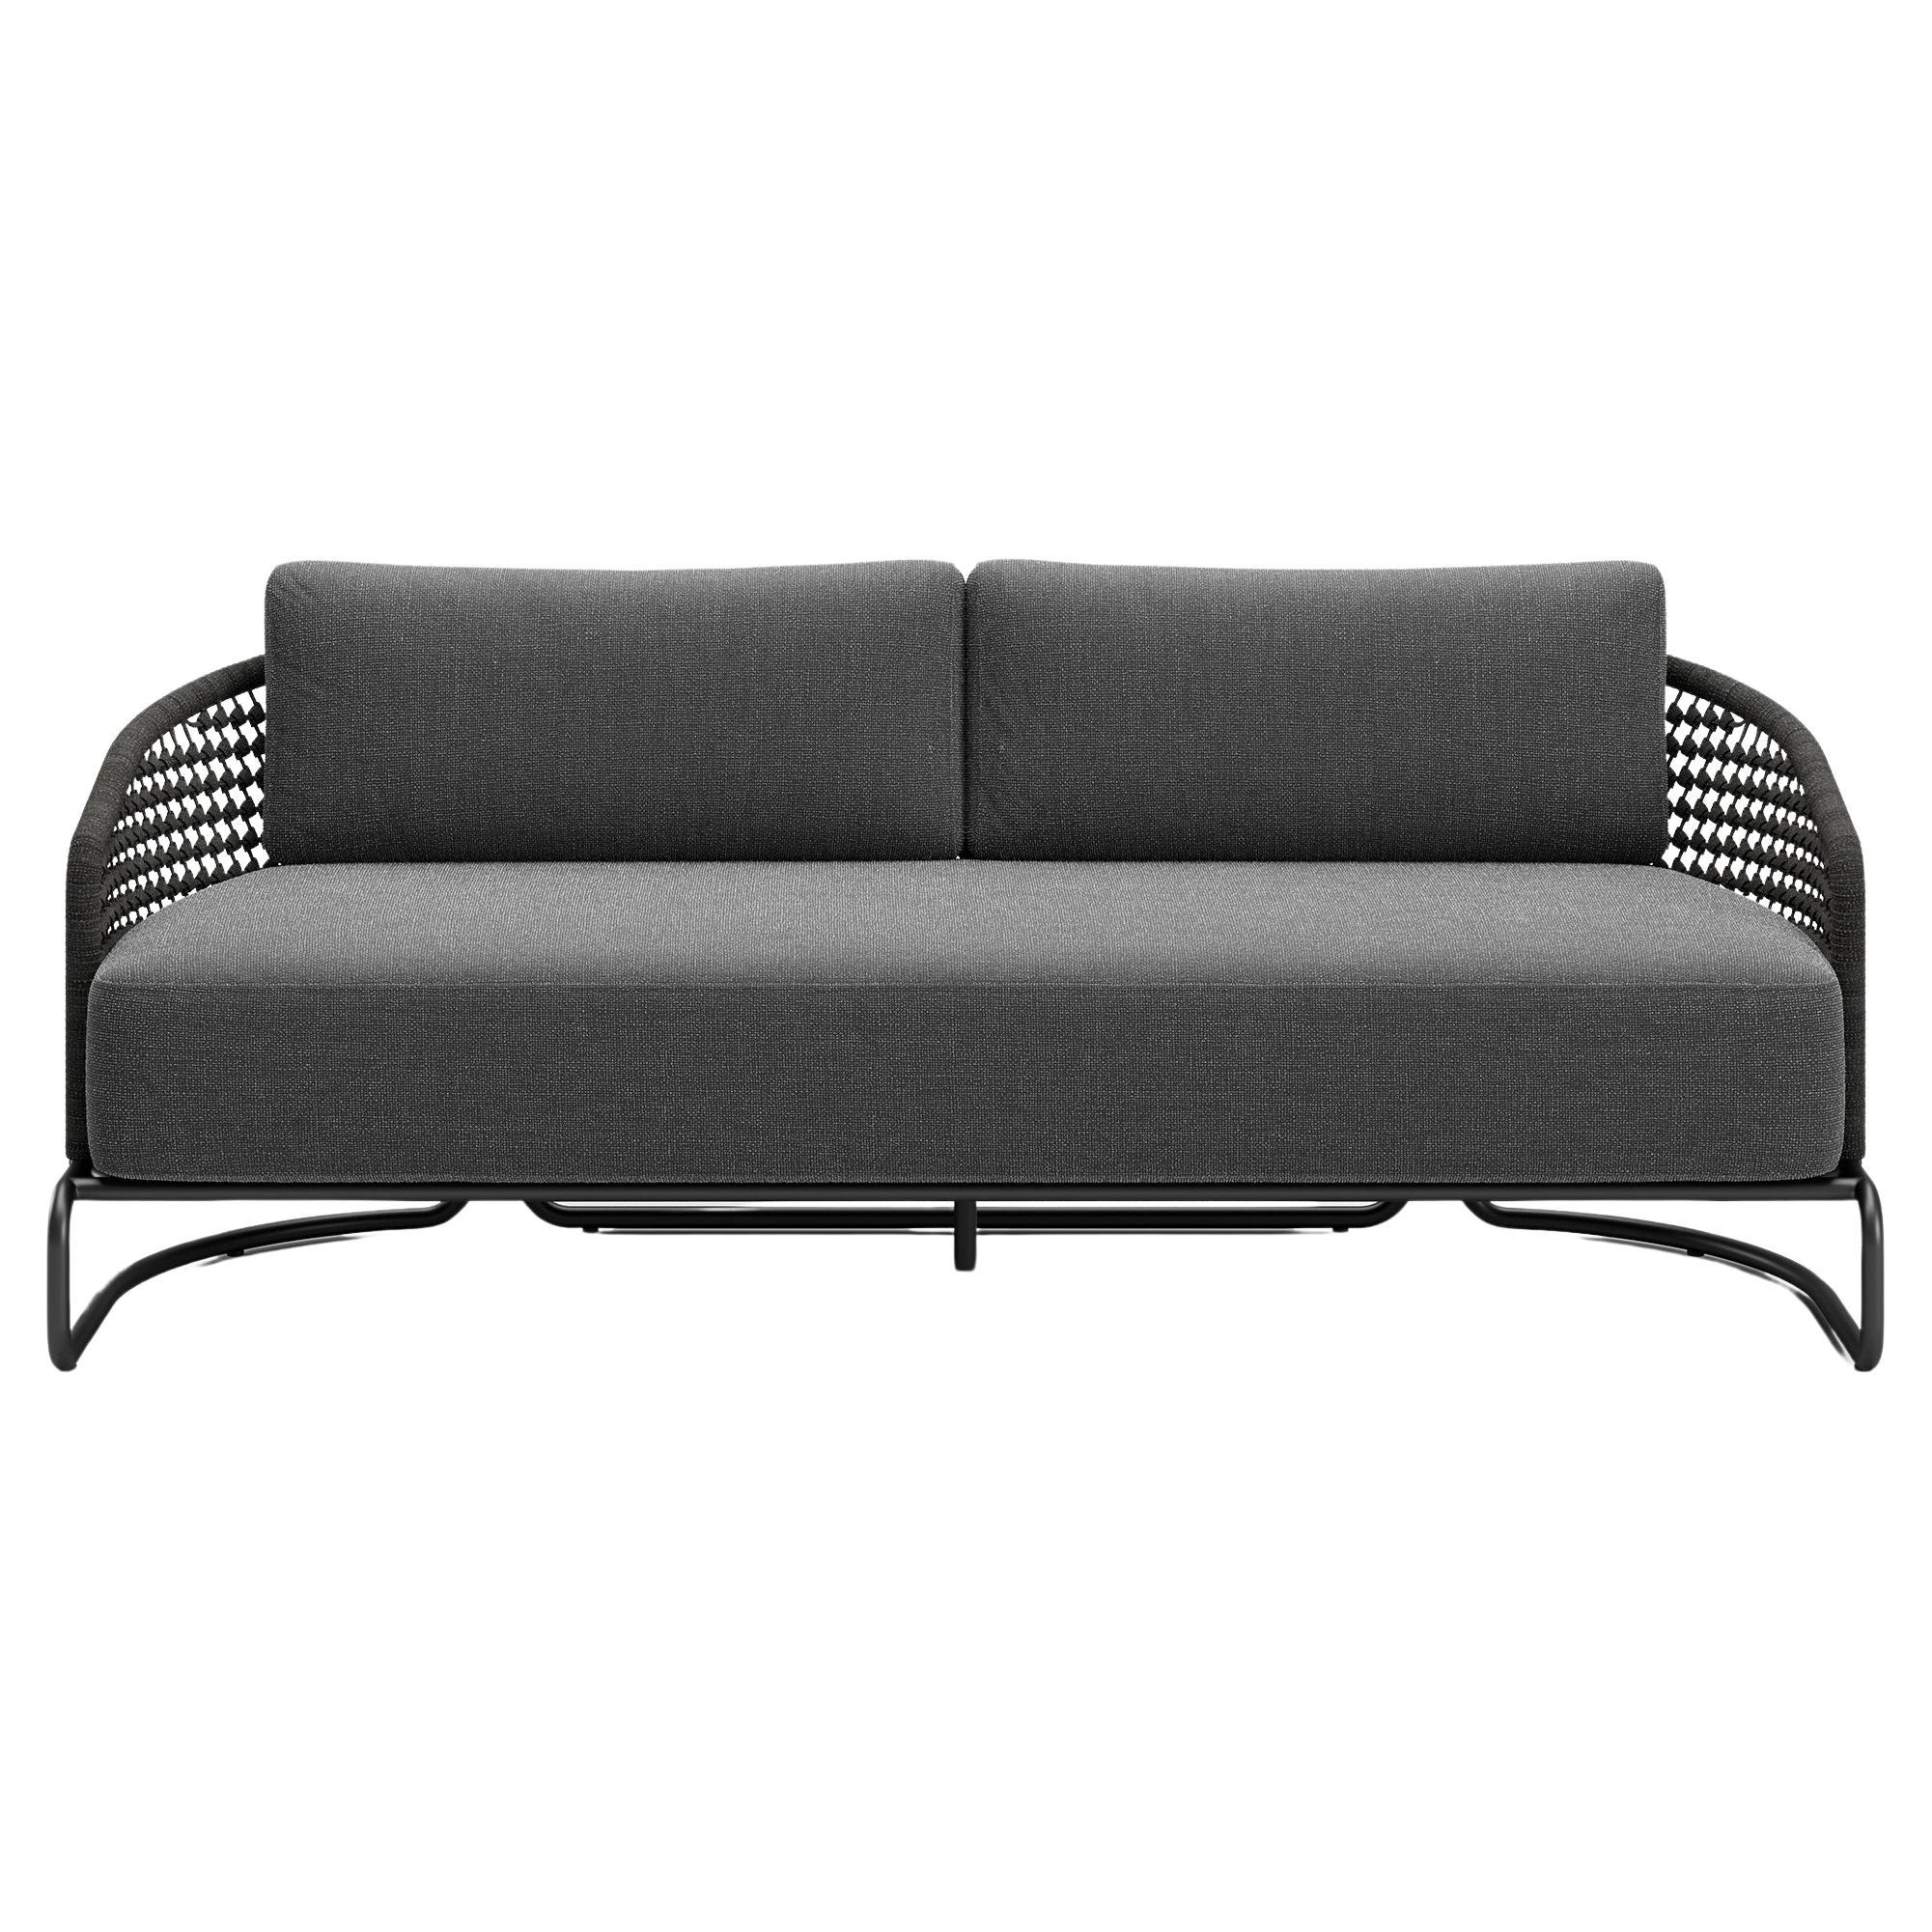 Pigalle Outdoor 2 Seater Sofa by Snoc For Sale